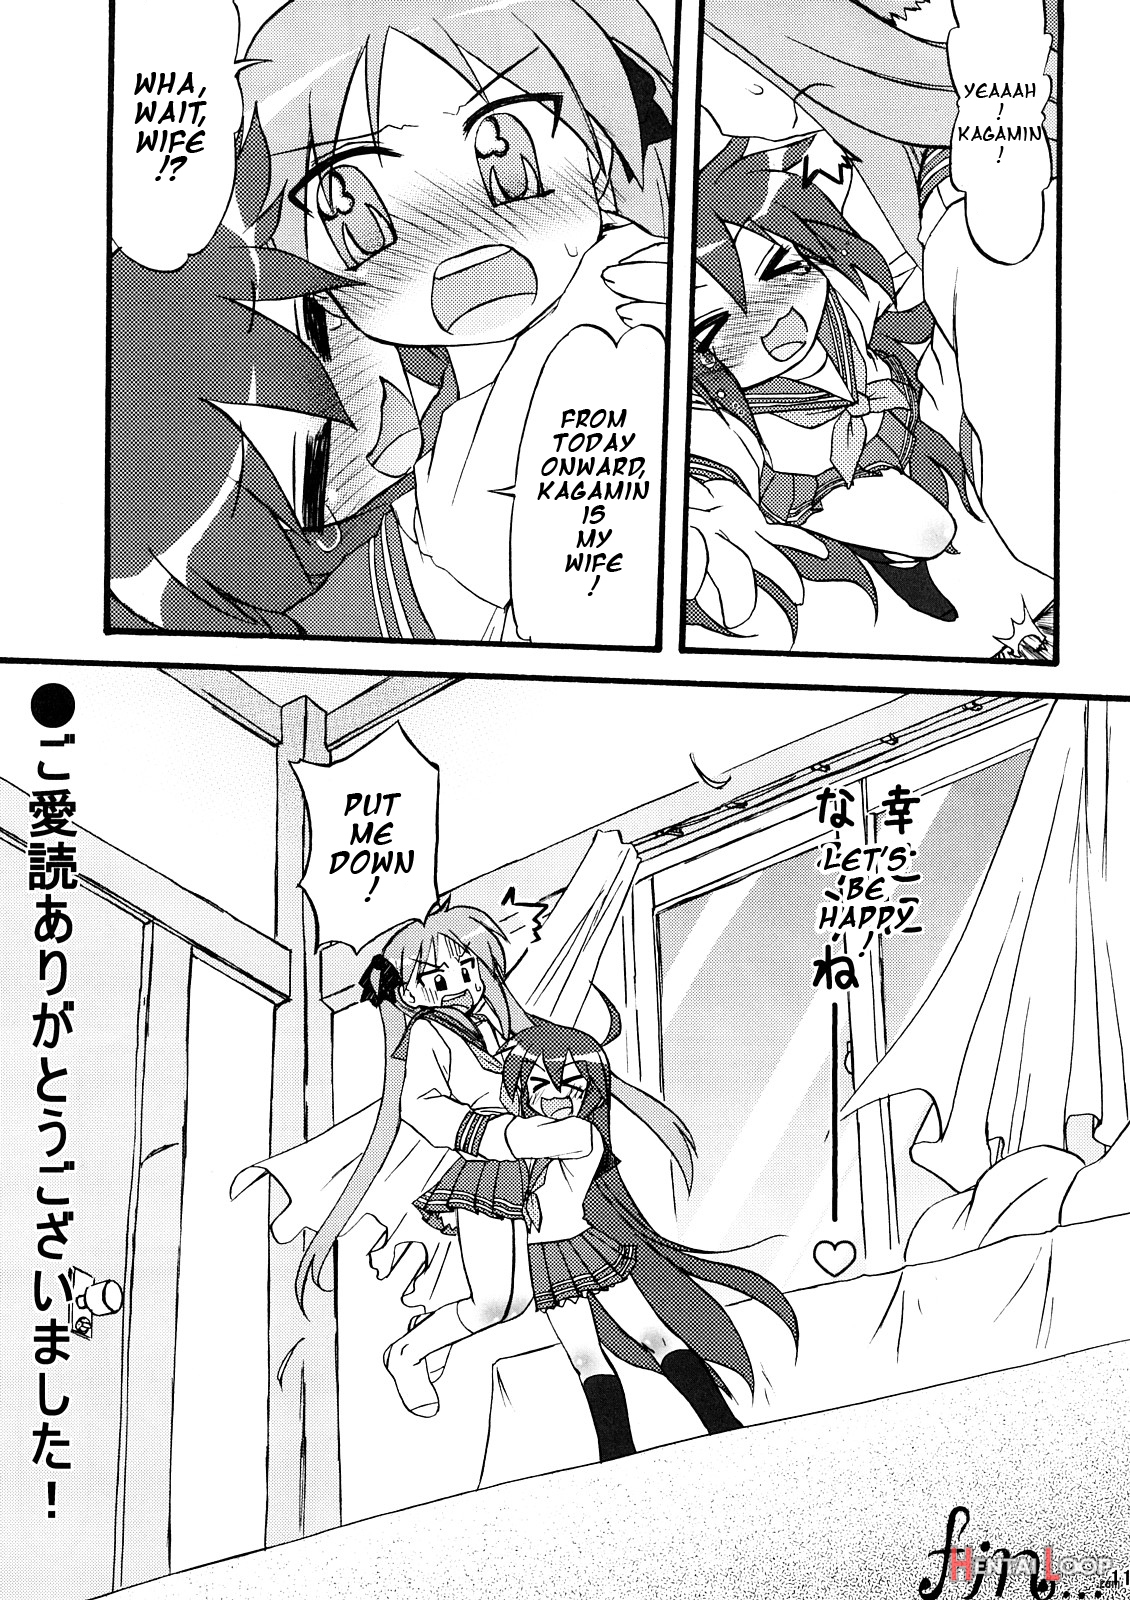 Blue Sumire page 10